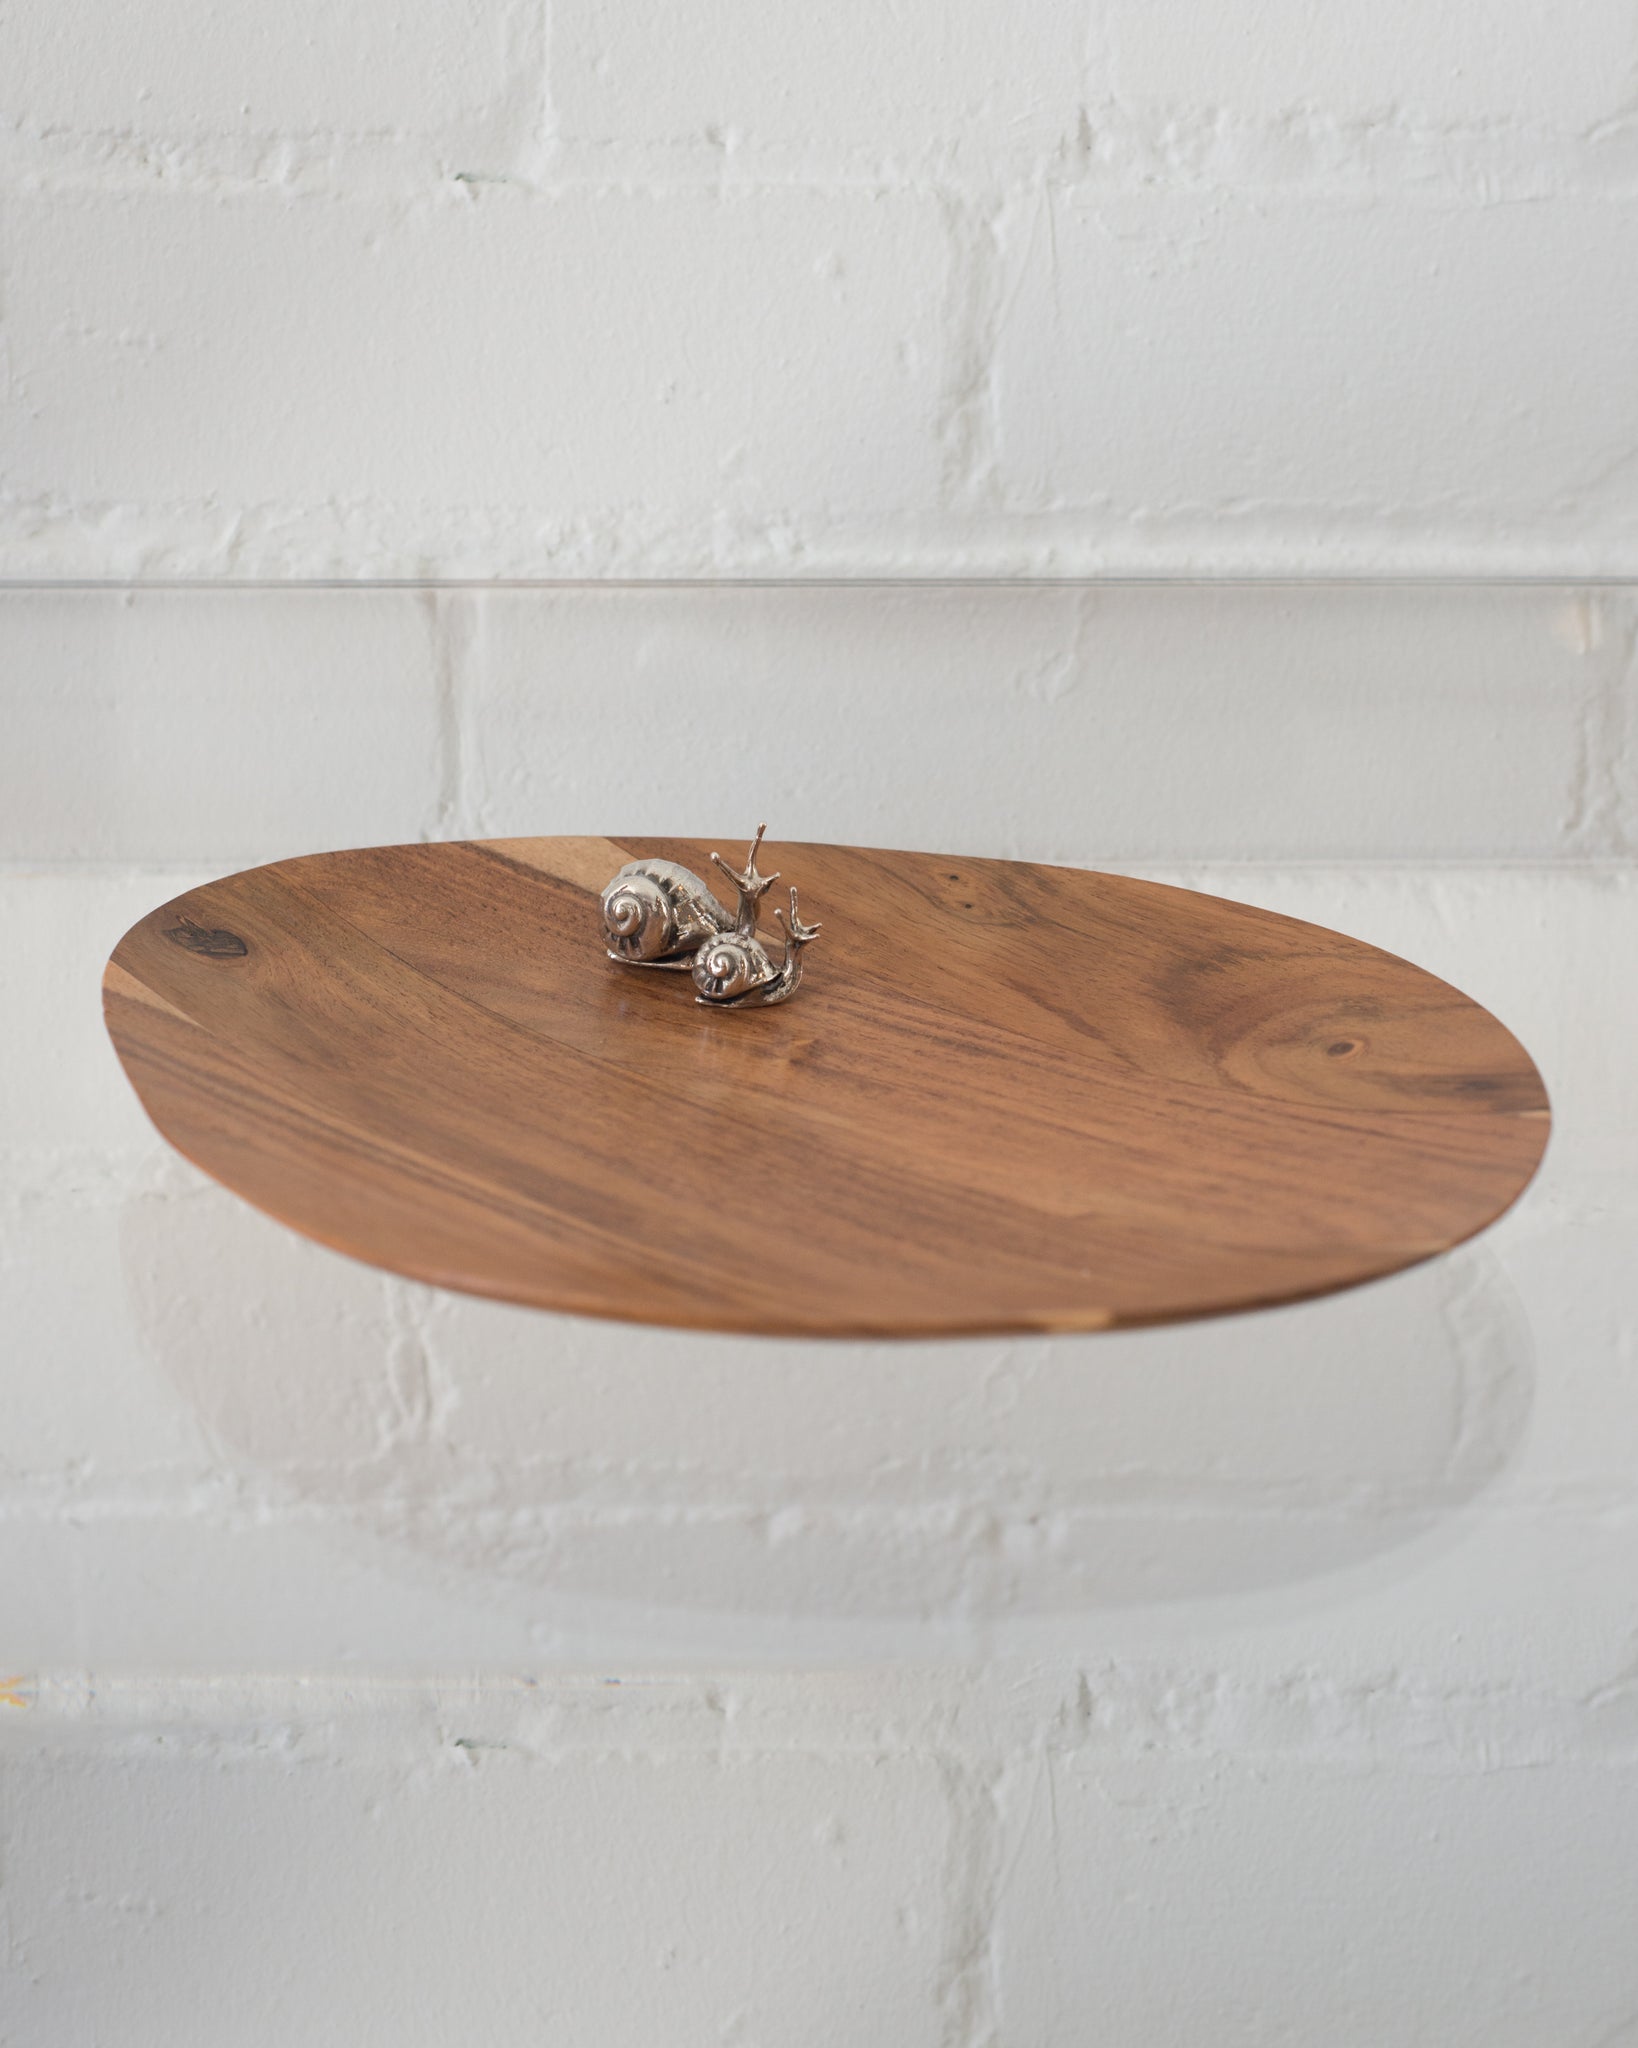 ASYMMETRIC ROSEWOOD PLATTER WITH 2 925 STERLING SILVER SNAILS